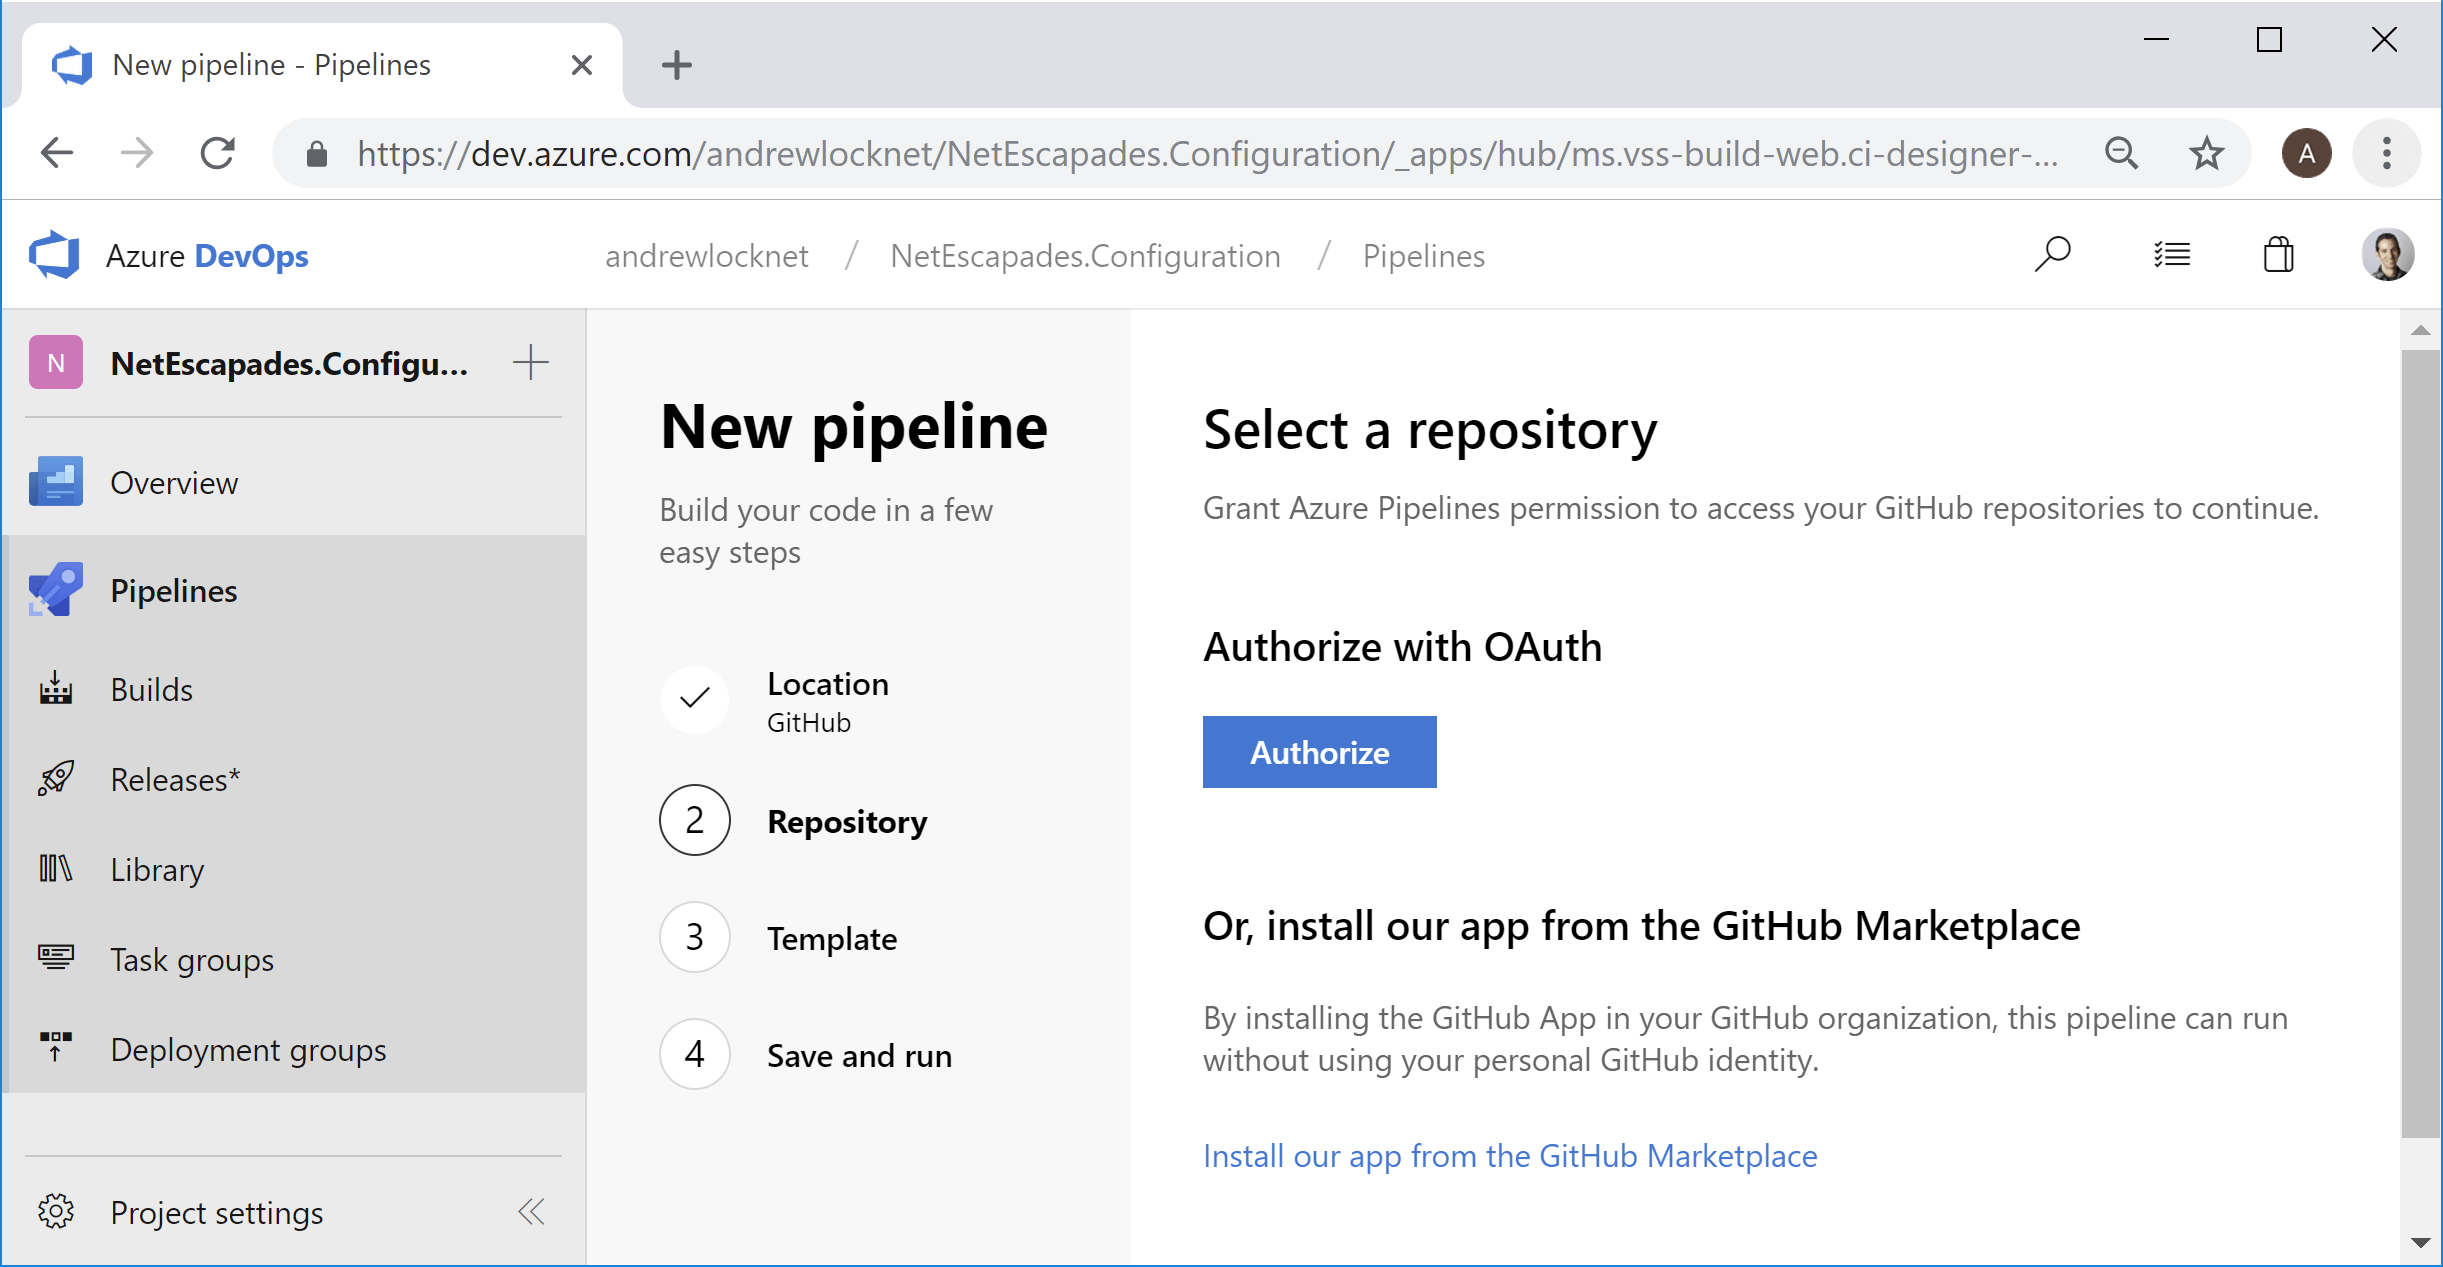 Step 2: Select a repository